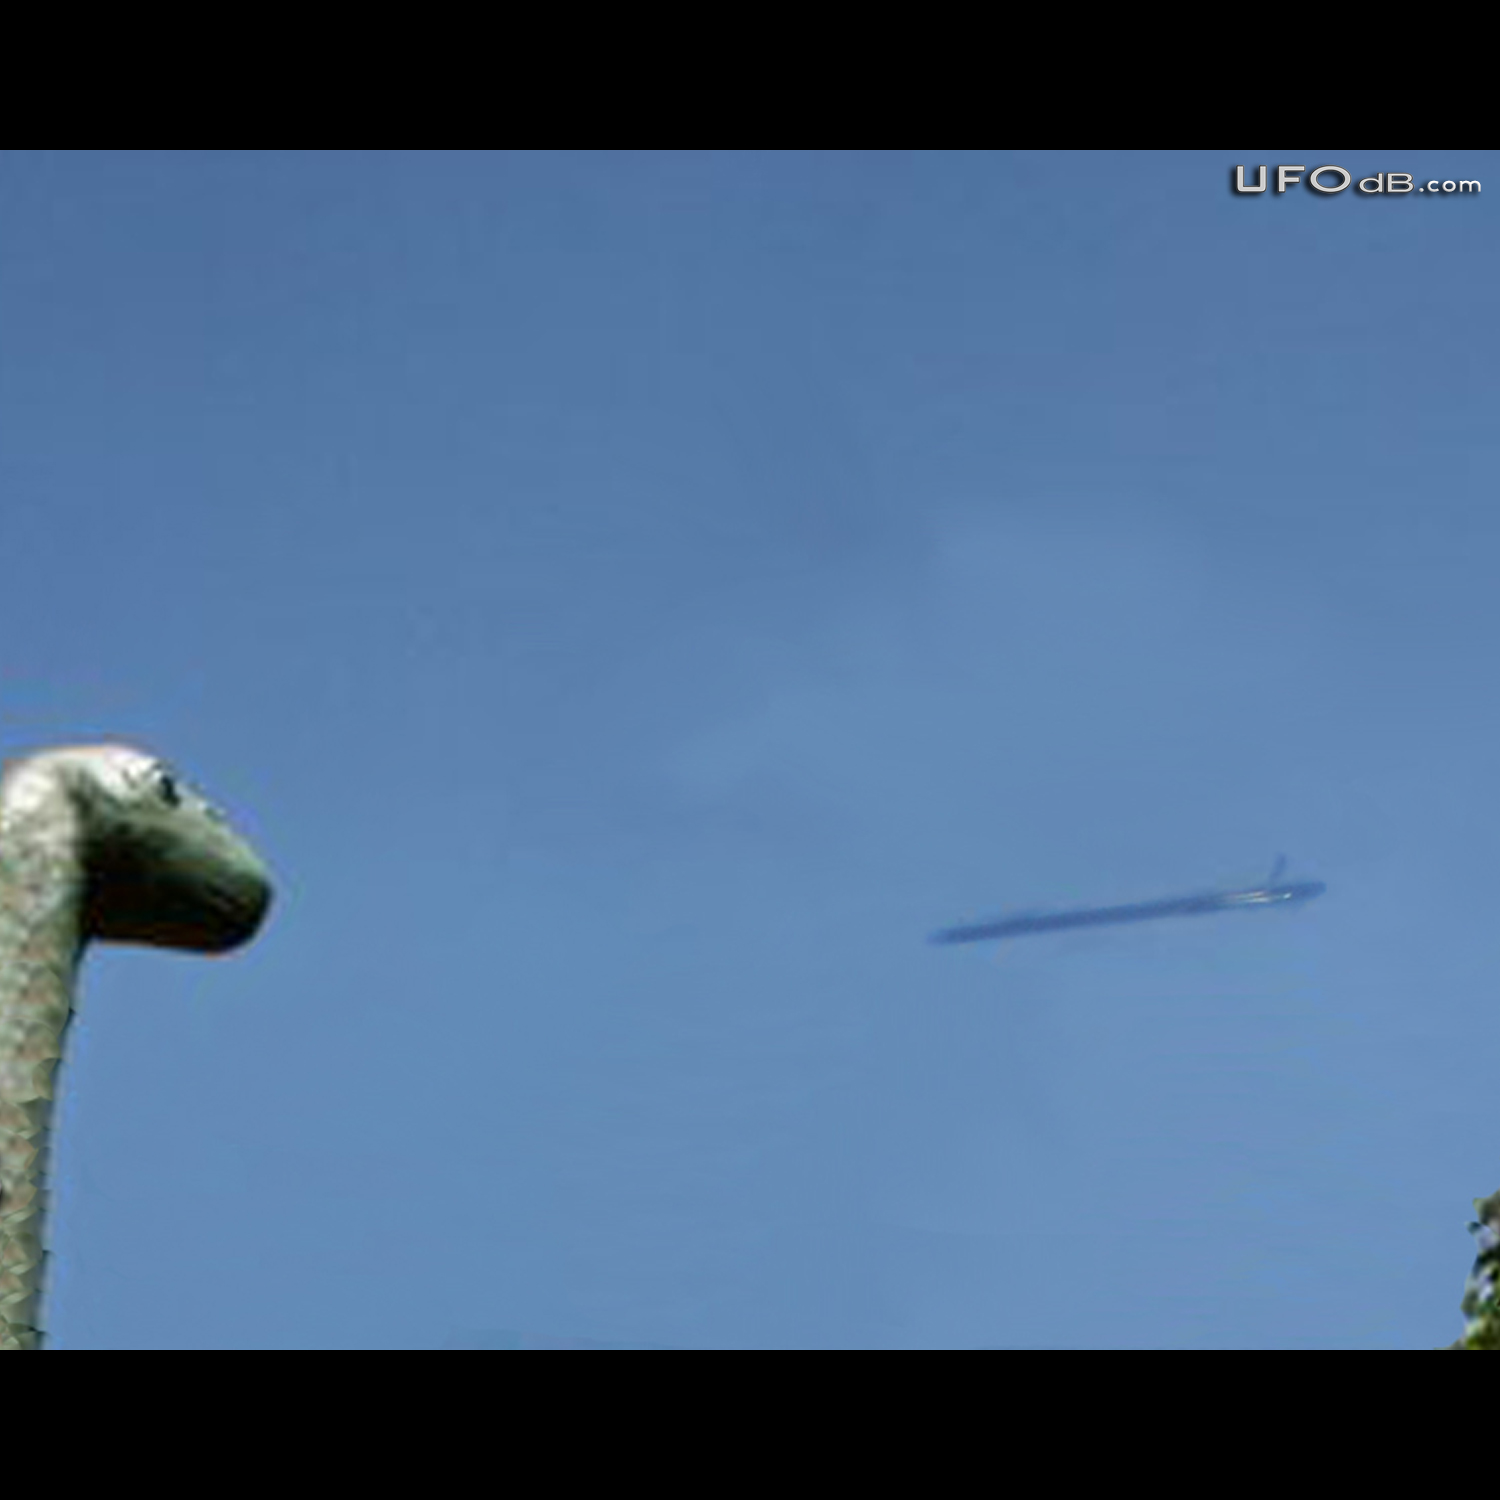 Prehistoric World visited by a UFO in Canada | Morrisburg Ontario 2010 UFO Picture #252-2